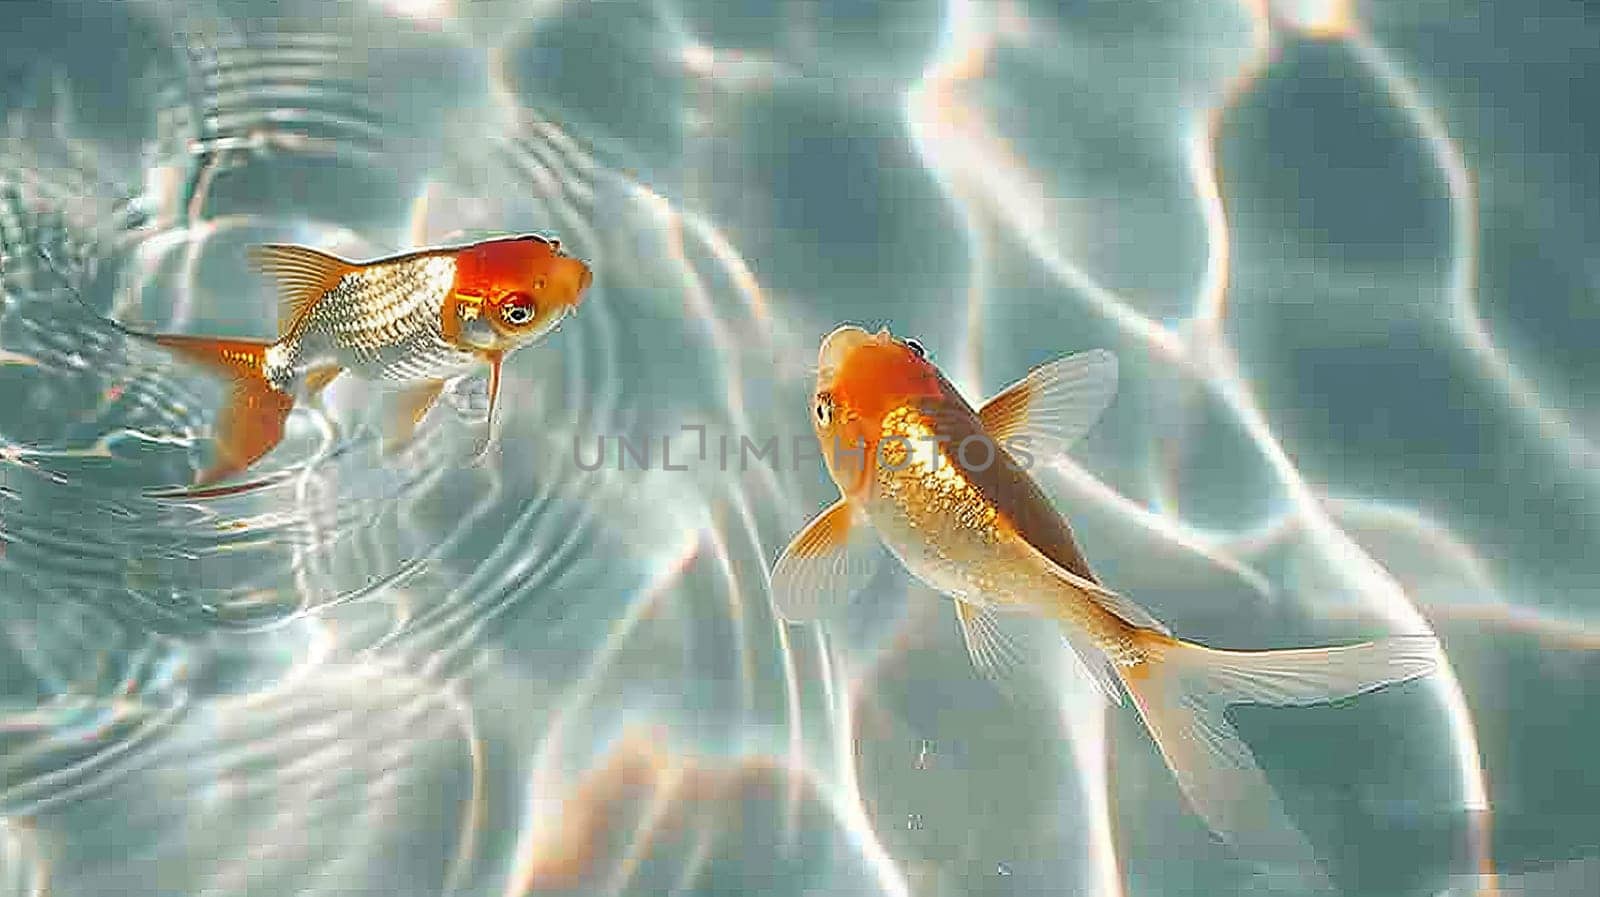 Two goldfish swimming in a pool of water. The water is clear and calm. The fish are swimming close to each other